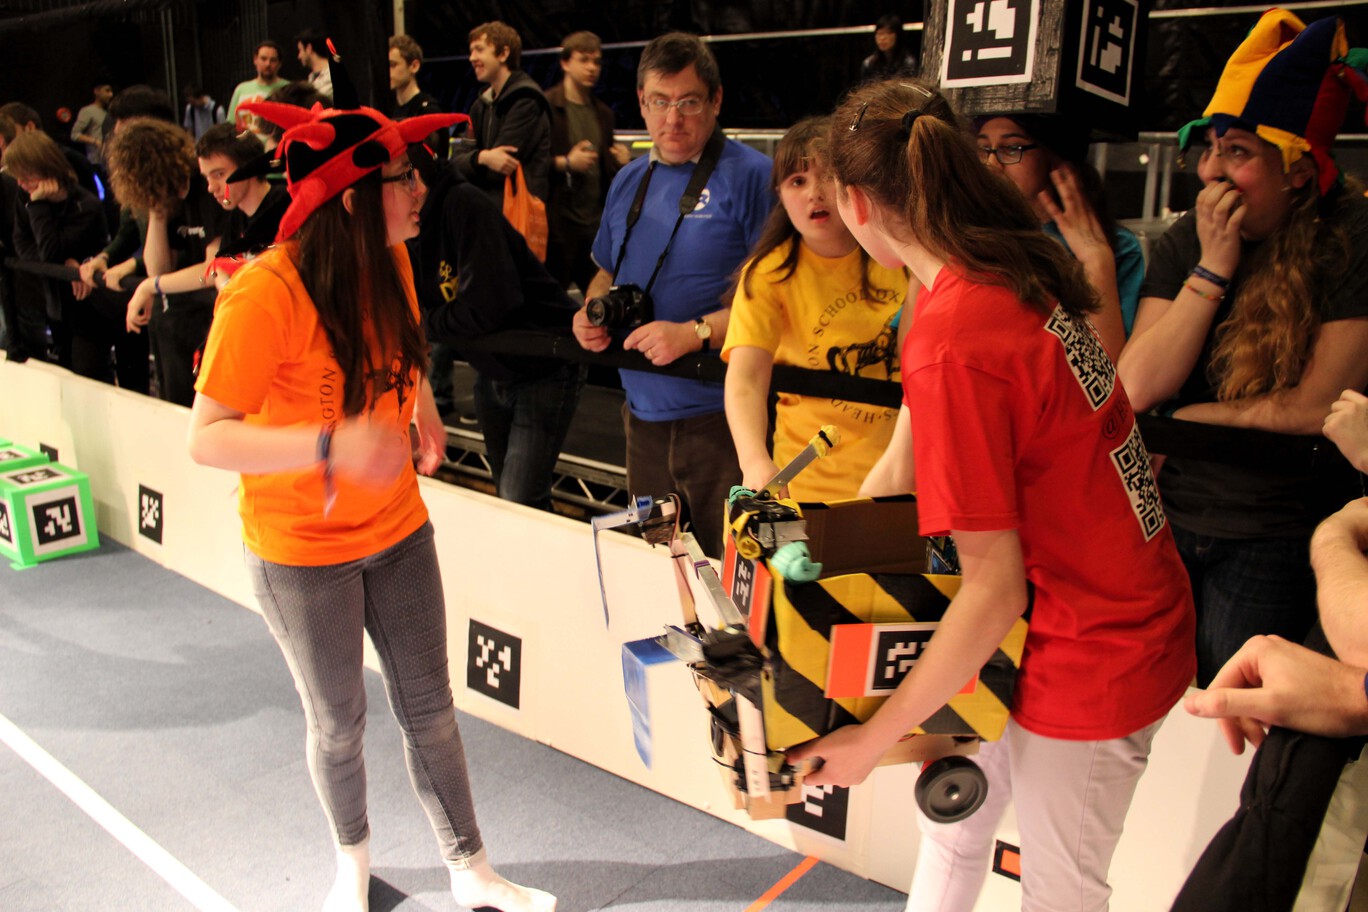 Competitors talking while placing their robot in their starting corner in the arena